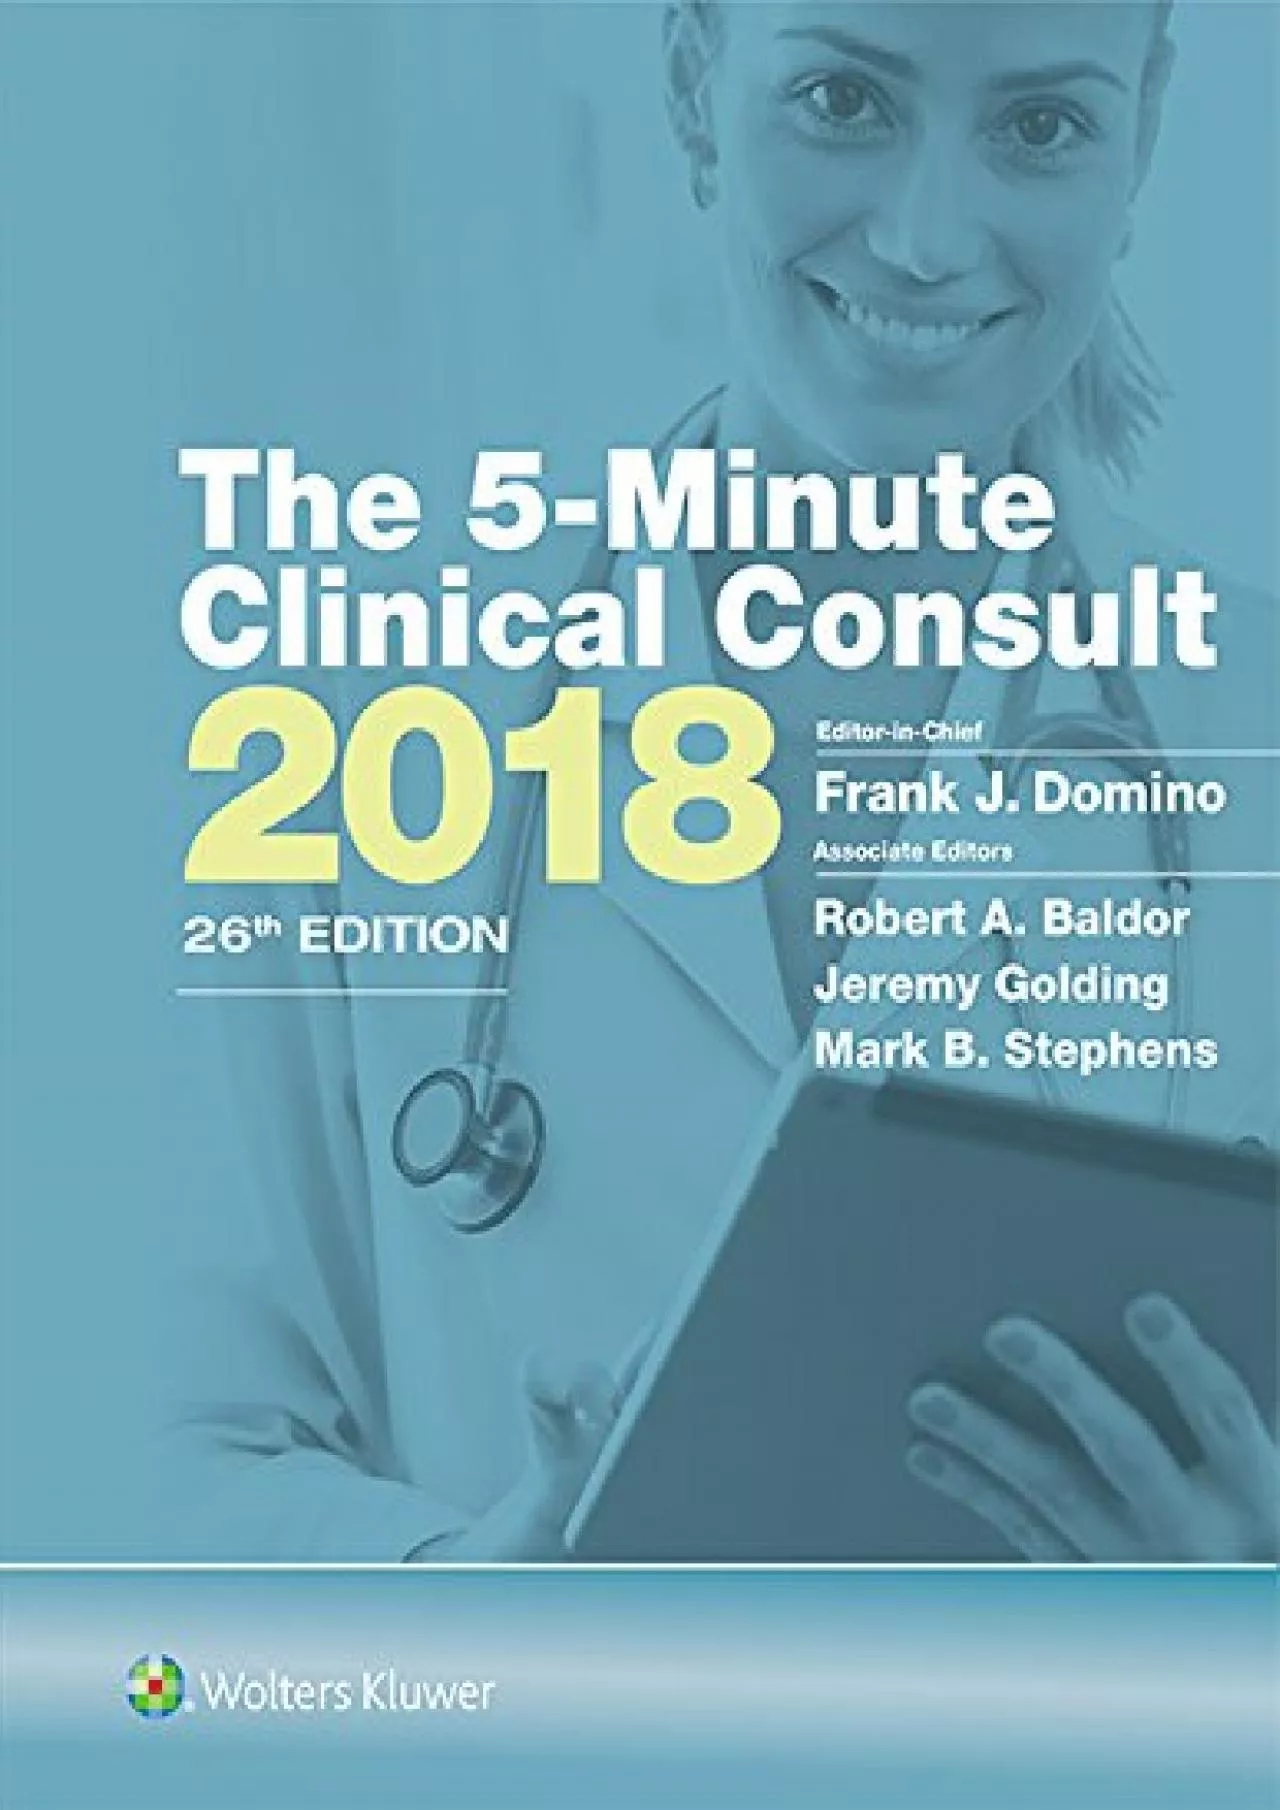 (DOWNLOAD)-The 5-Minute Clinical Consult 2018 (The 5-Minute Consult Series)